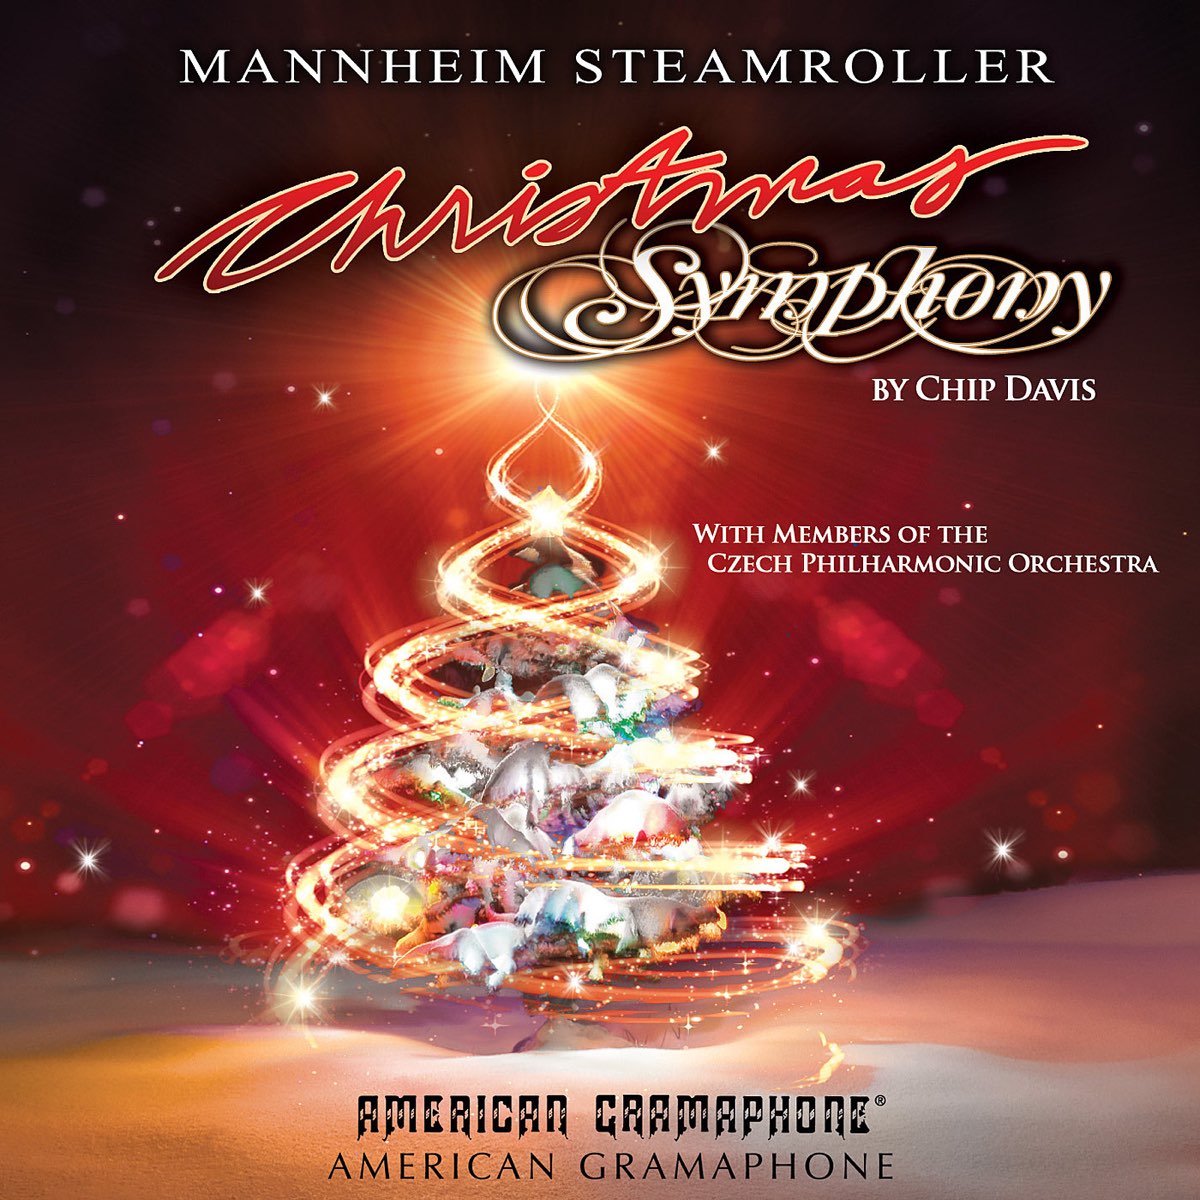 ‎Christmas Symphony by Mannheim Steamroller on Apple Music